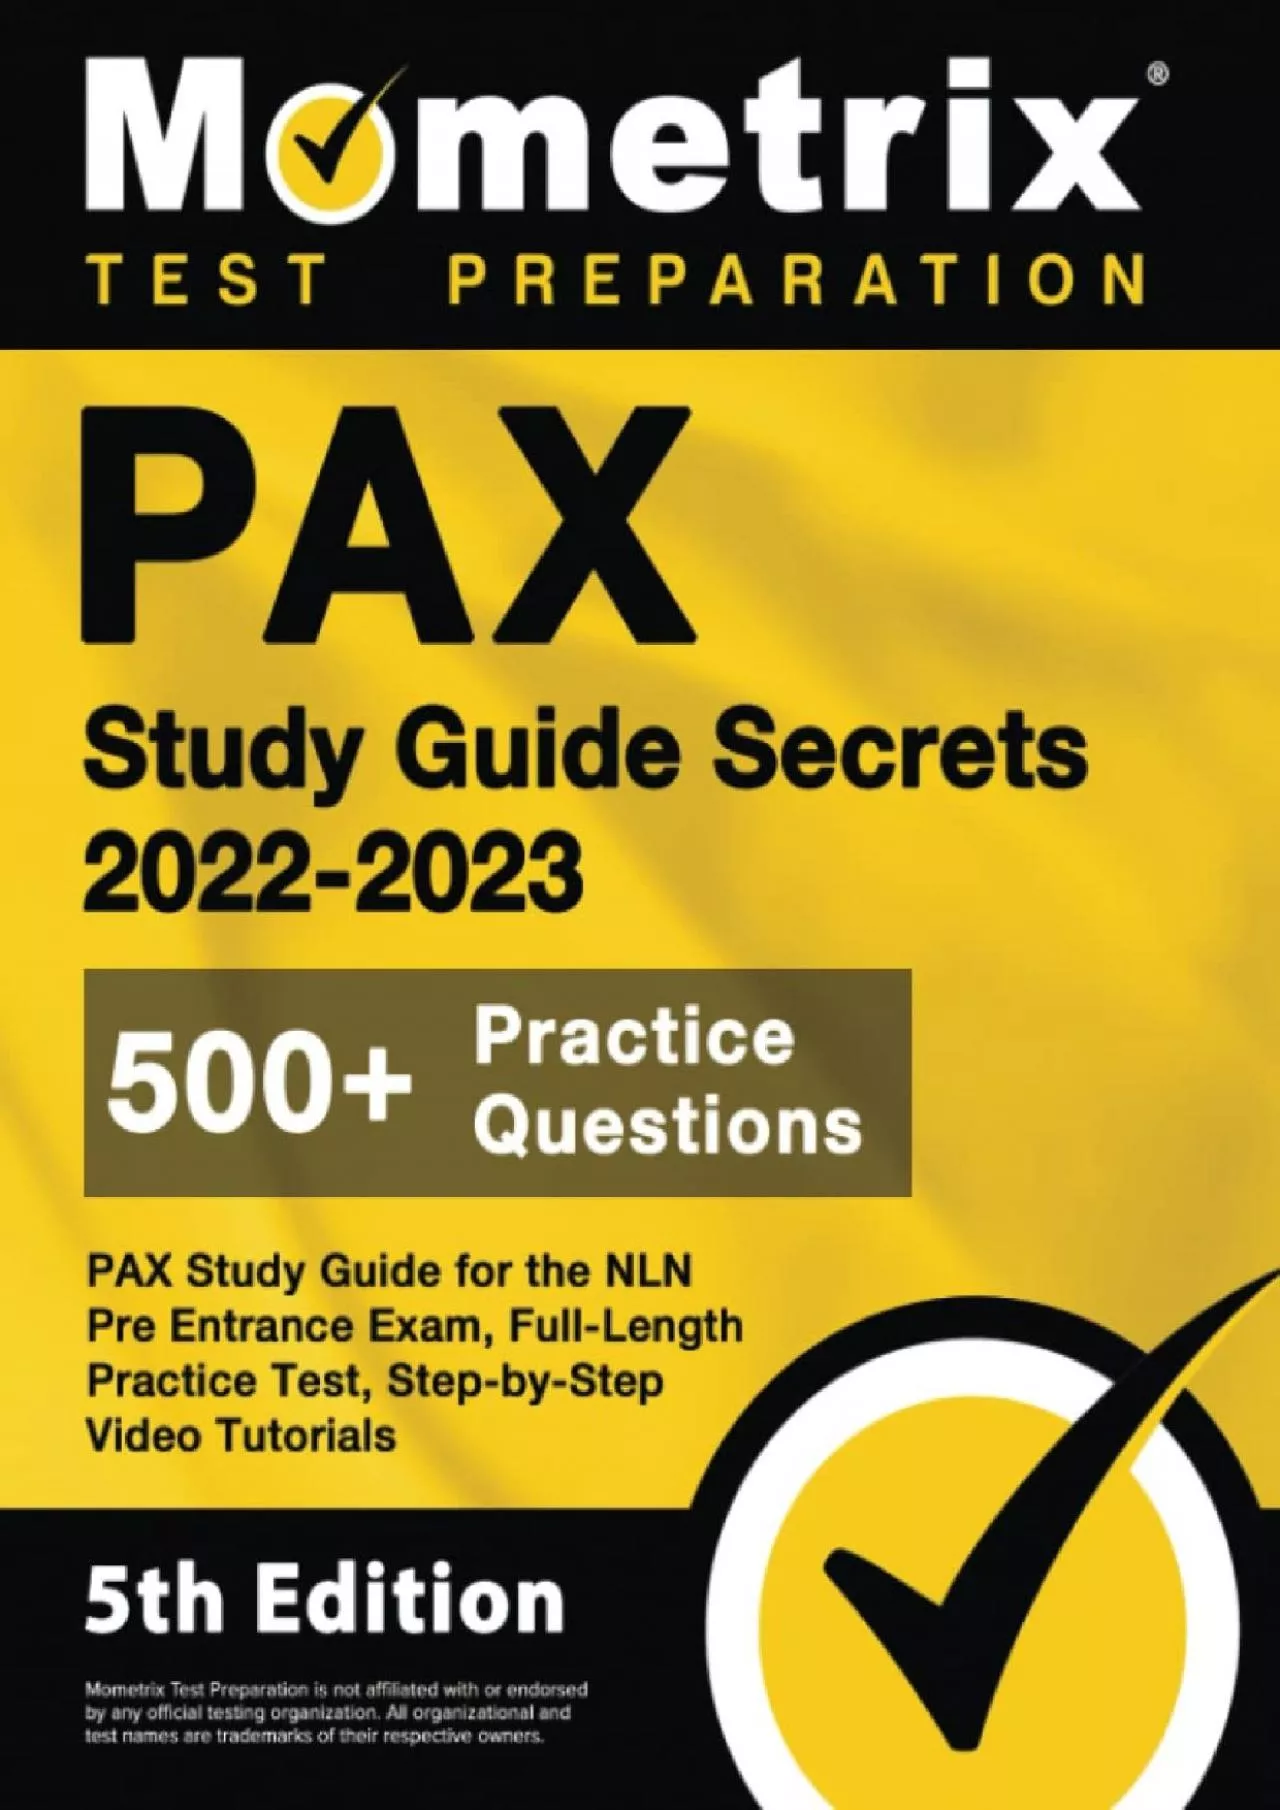 [EBOOK] PAX Study Guide Secrets 2022-2023 for the NLN Pre Entrance Exam, Full-Length Practice